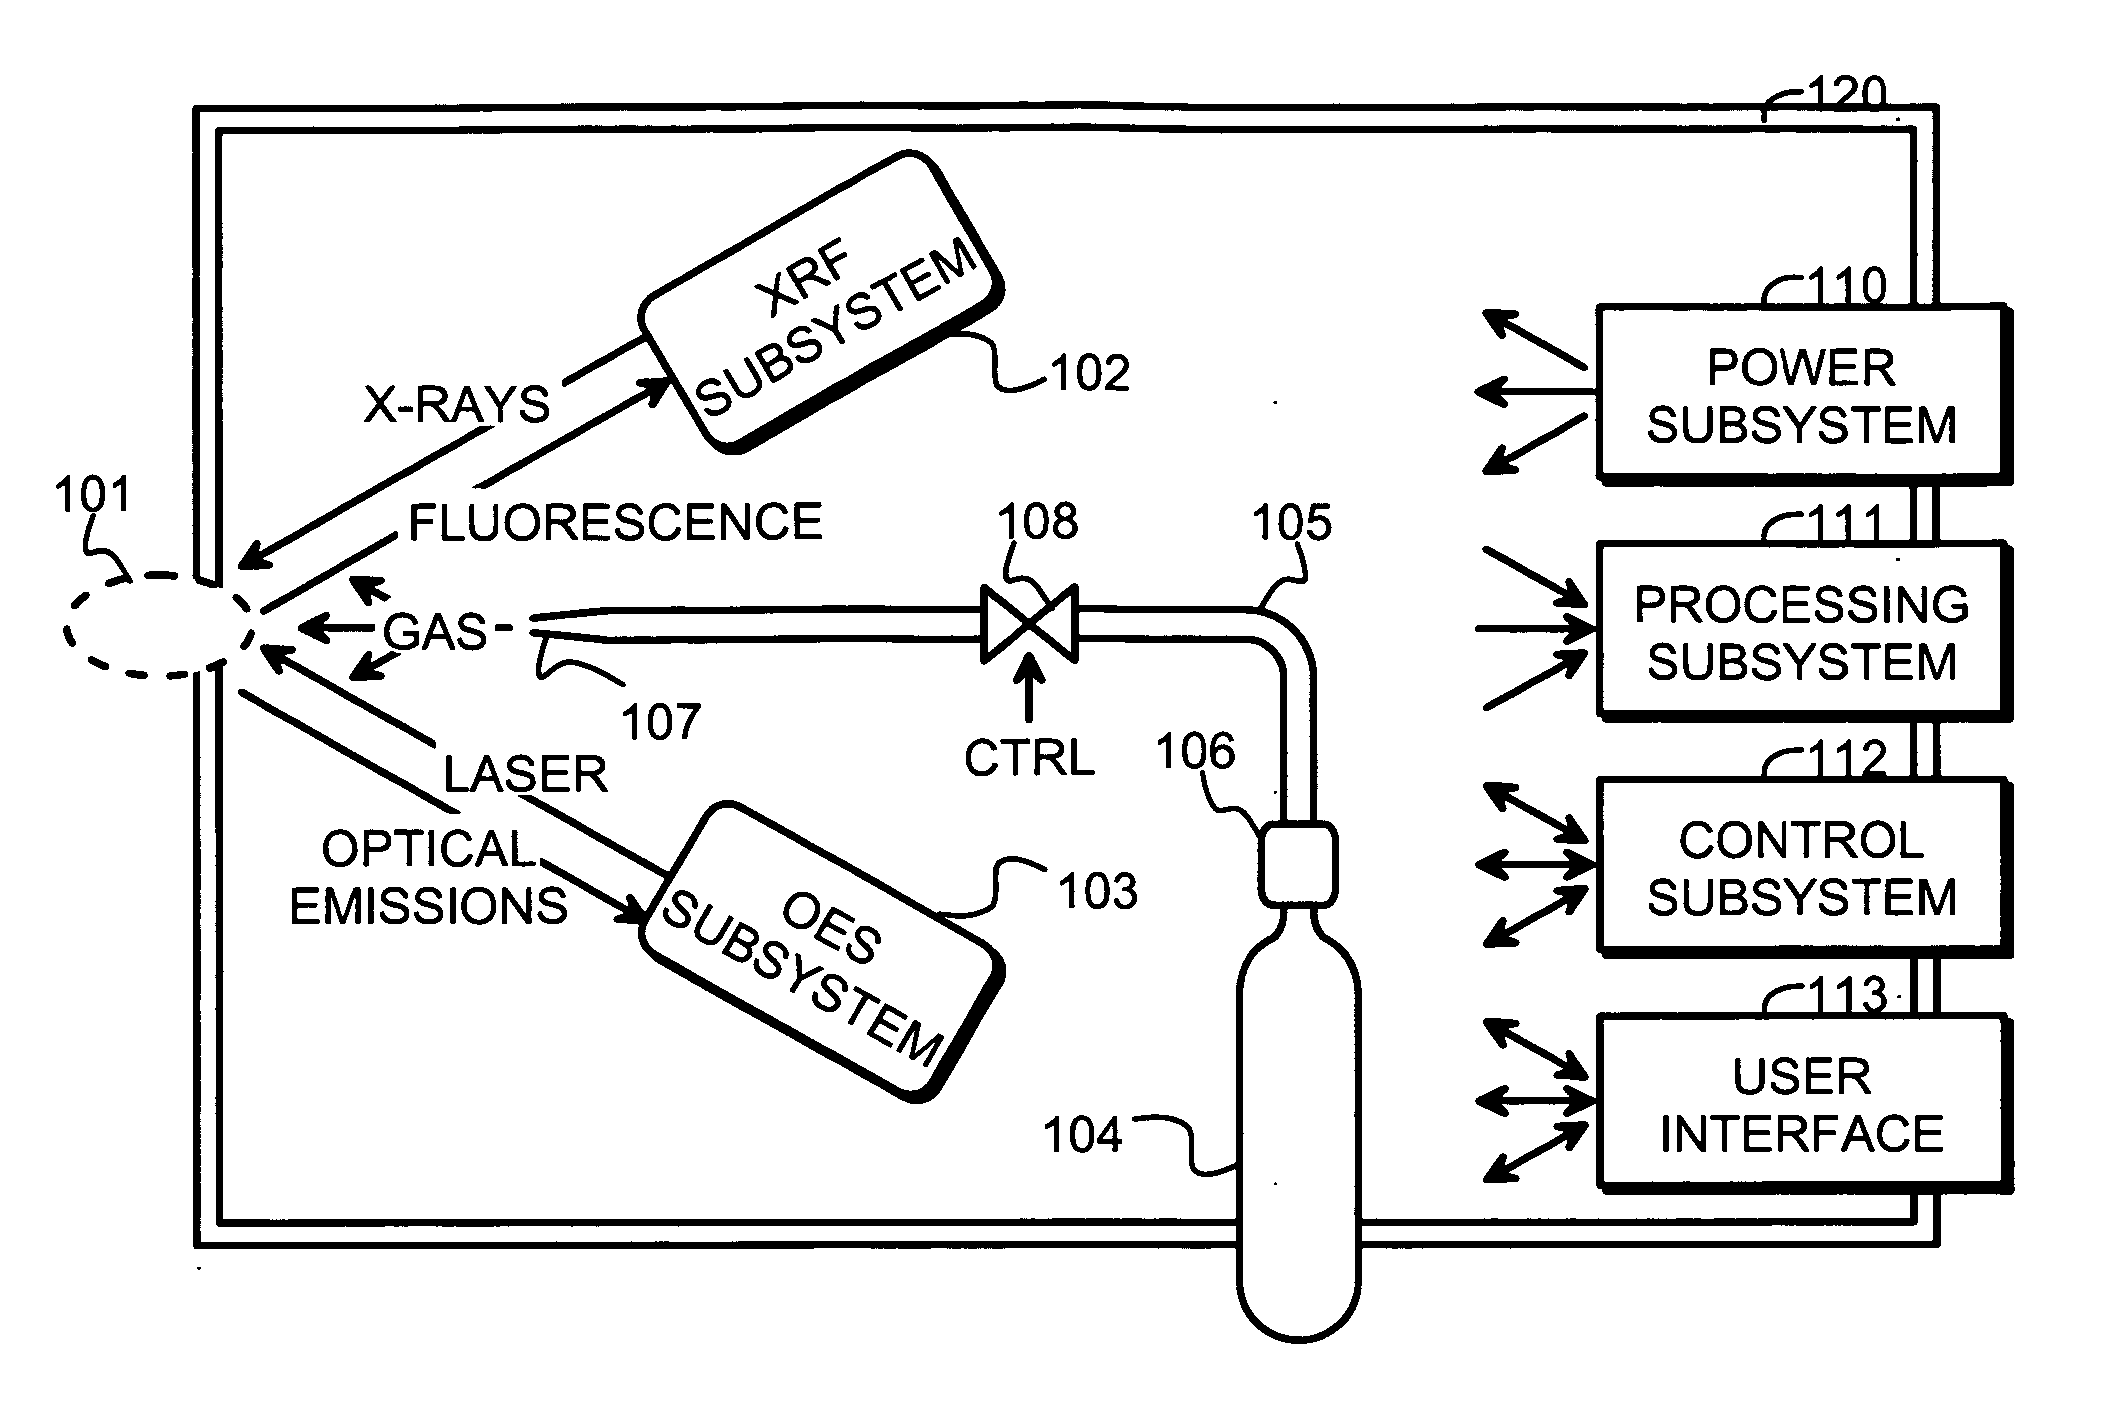 Measurement apparatus and method for determining the material composition of a sample by combined X-ray fluorescence analysis and laser-induced breakdown spectroscopy